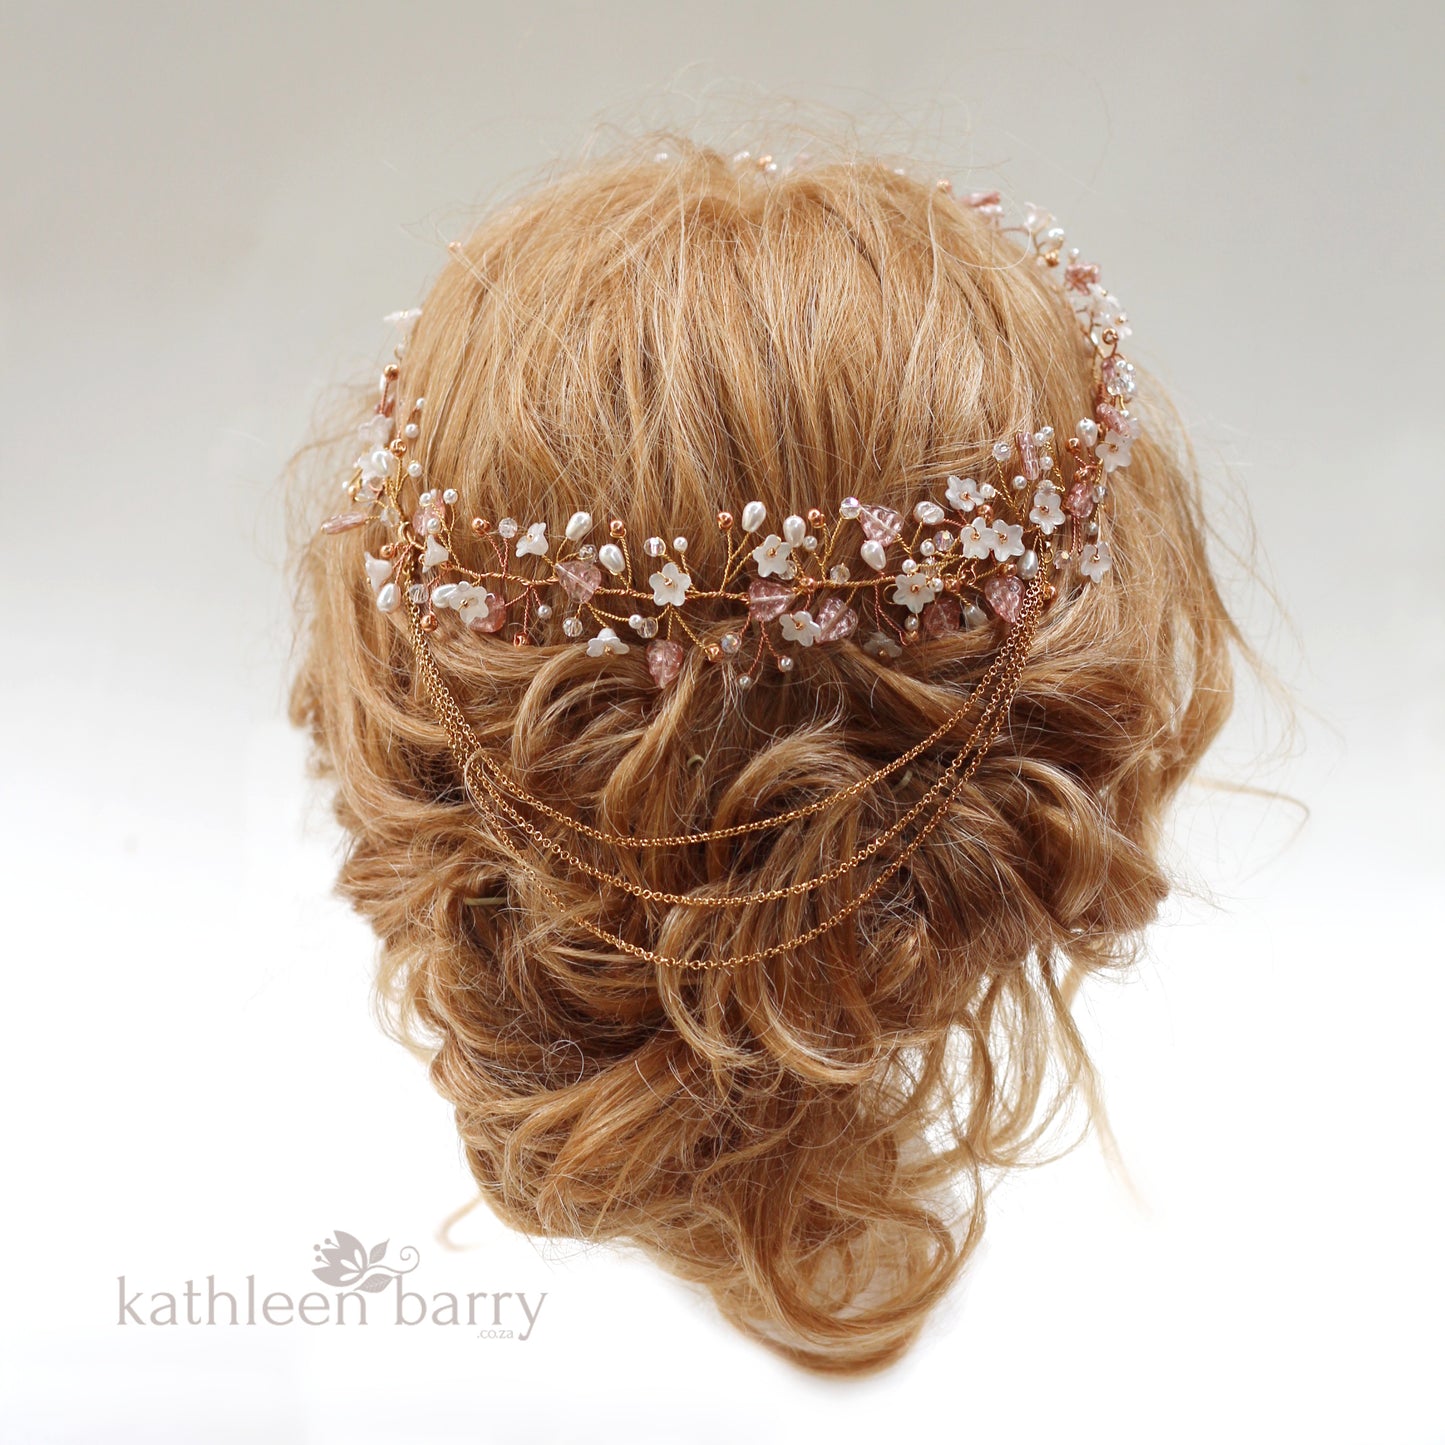 Simone dainty floral and leaf vine style hairpiece with optional chain detail - Assorted finishes